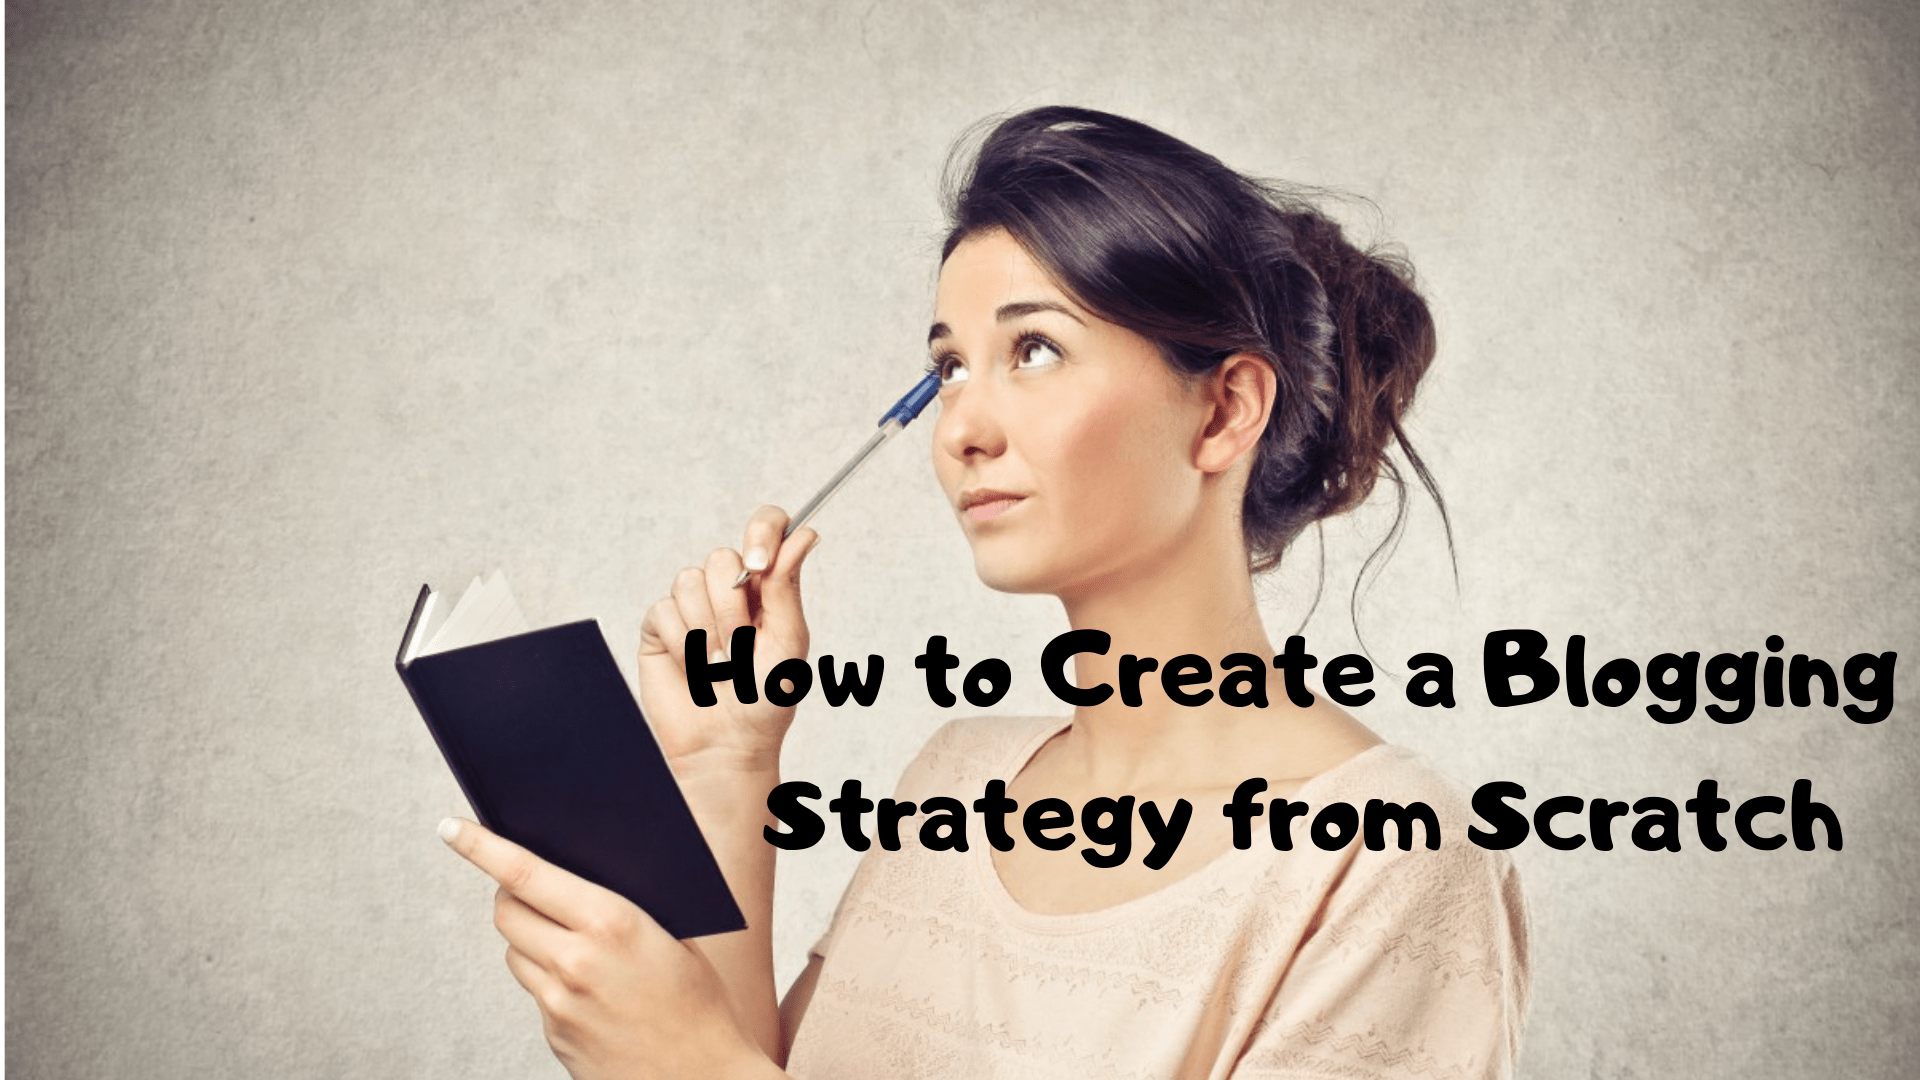 How to Create a Blogging Strategy from Scratch